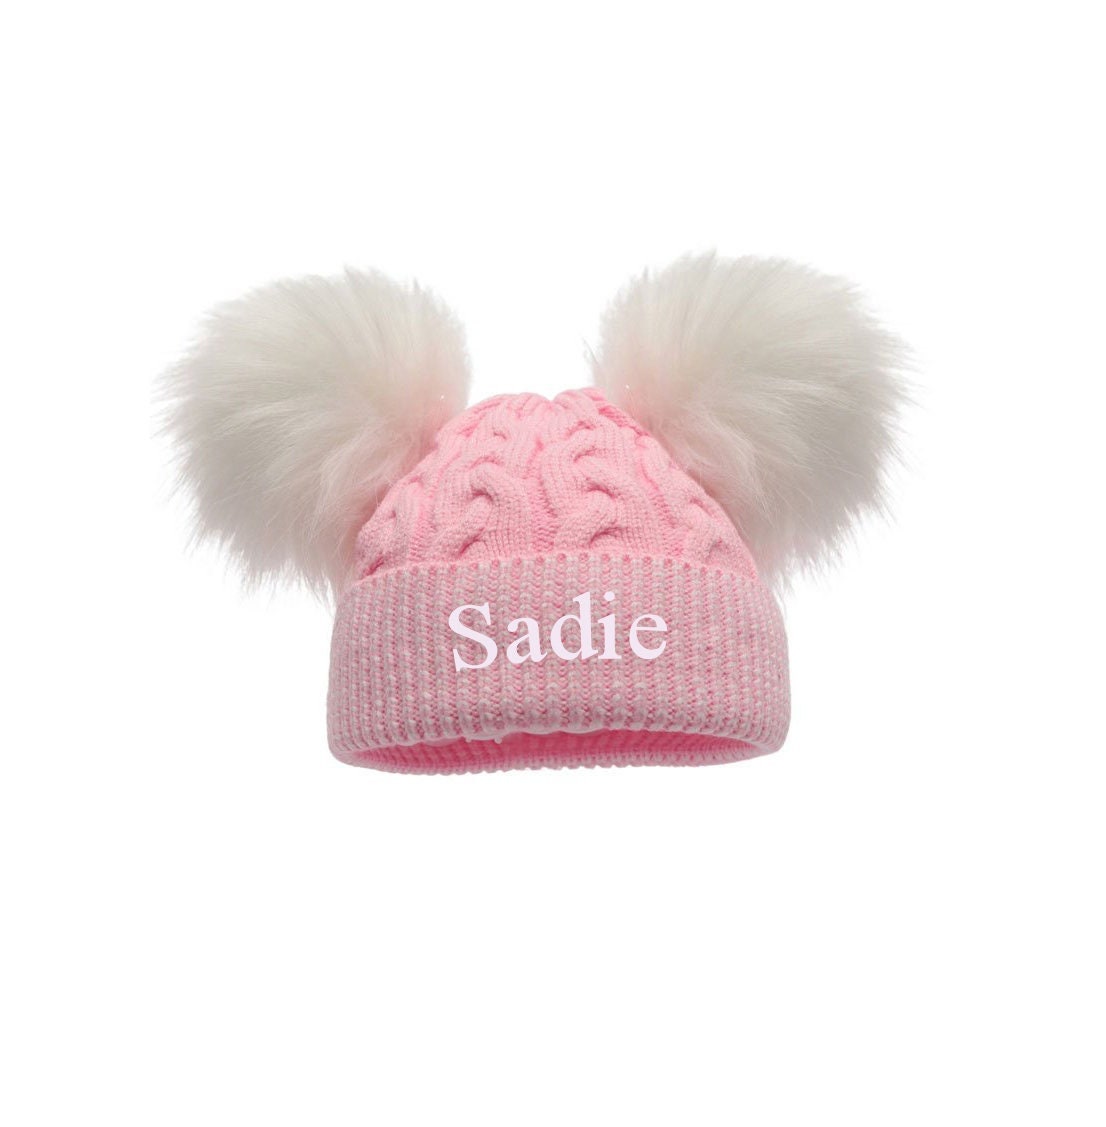 Personalised Pink Baby Hat With XL White Pom Poms 0-12 Mths - Etsy